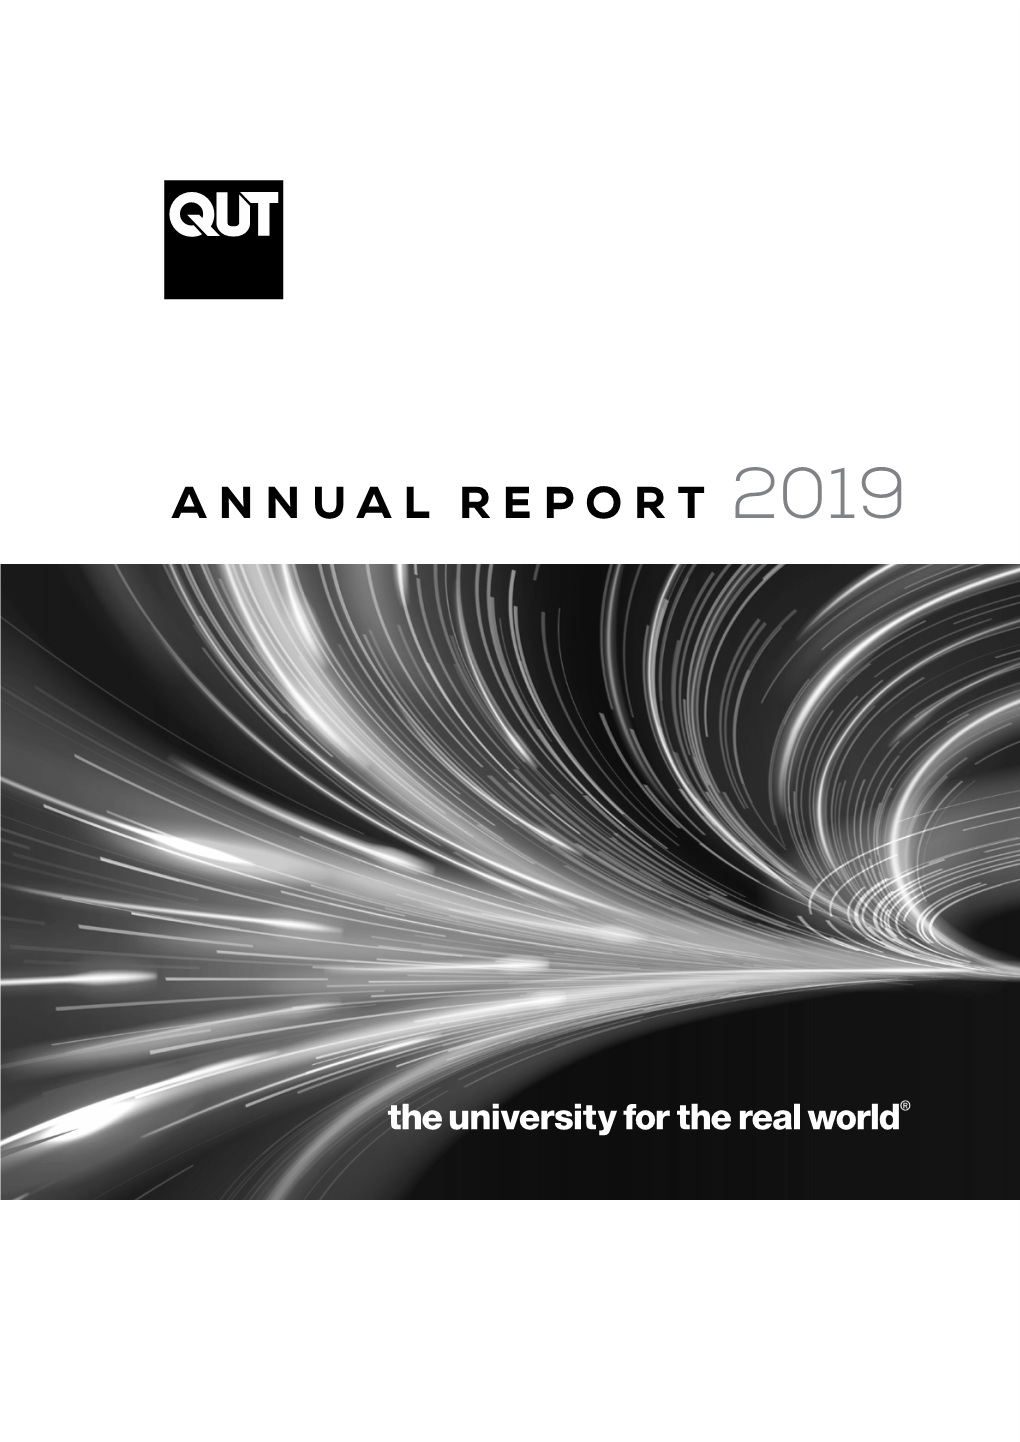 ANNUAL REPORT 2019 Page B | QUT Annual Report 2019 28 February 2020